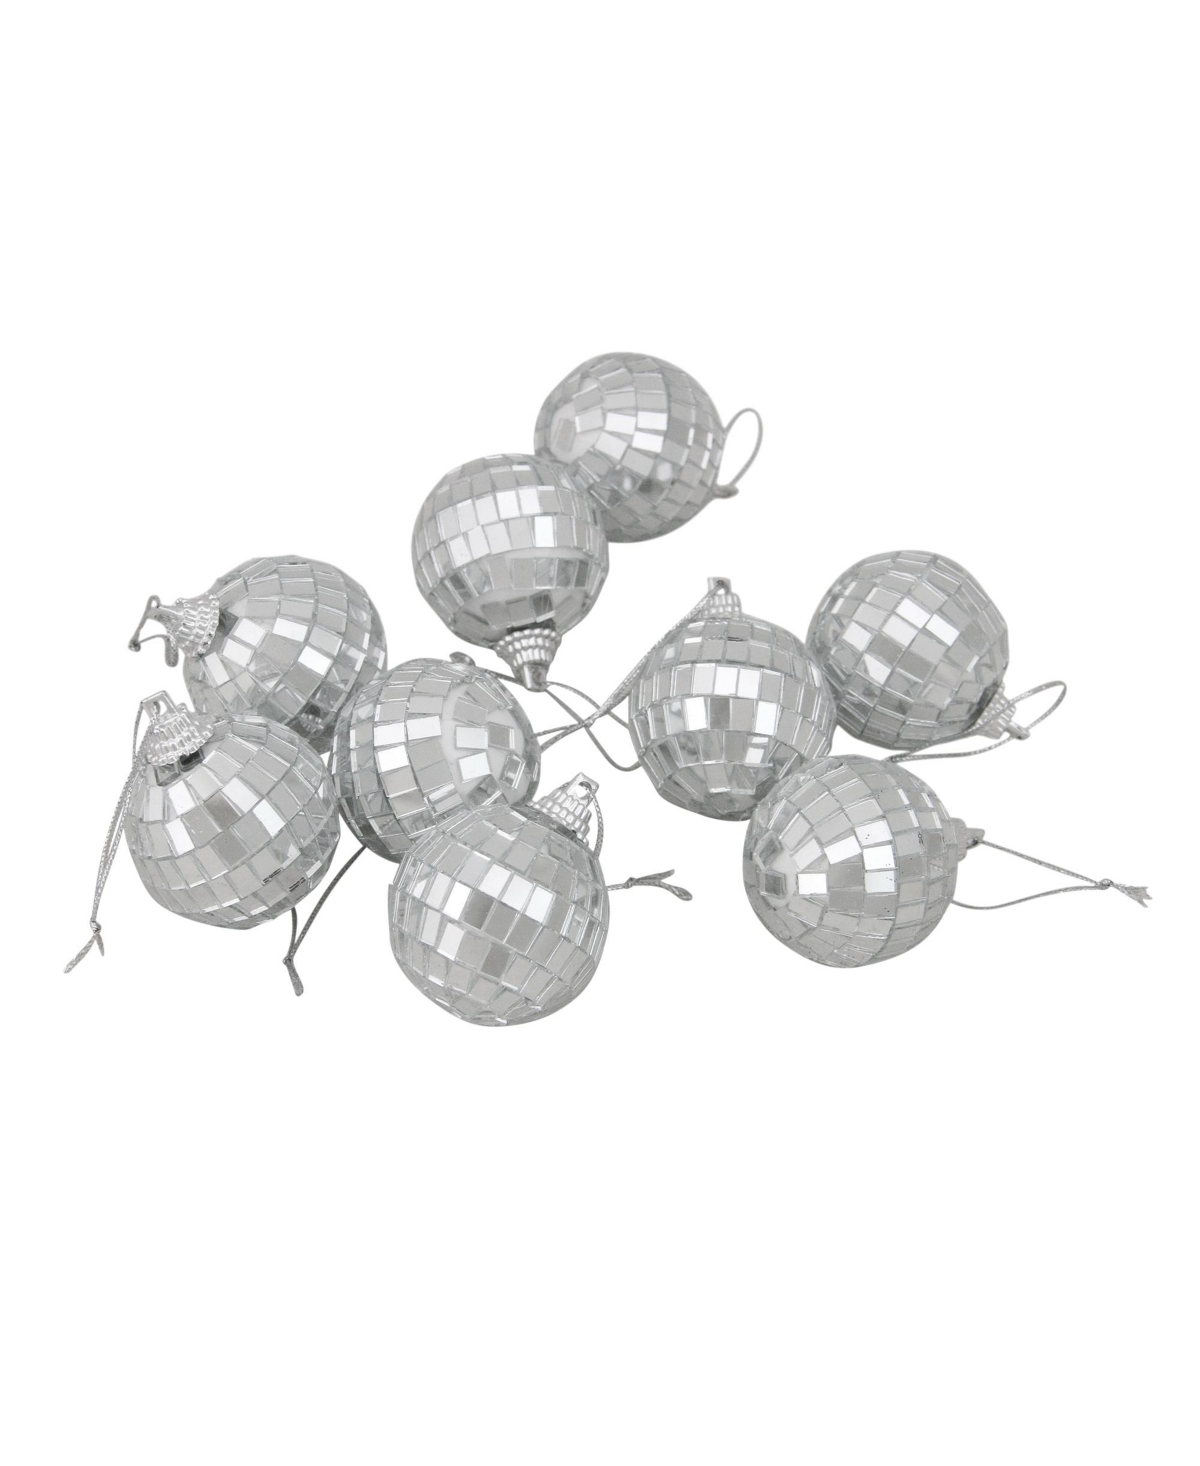 Northlight 9 Count Splendor Mirrored Glass Disco Ball Christmas Ornaments 40mm Set, 1.5" In Silver-tone